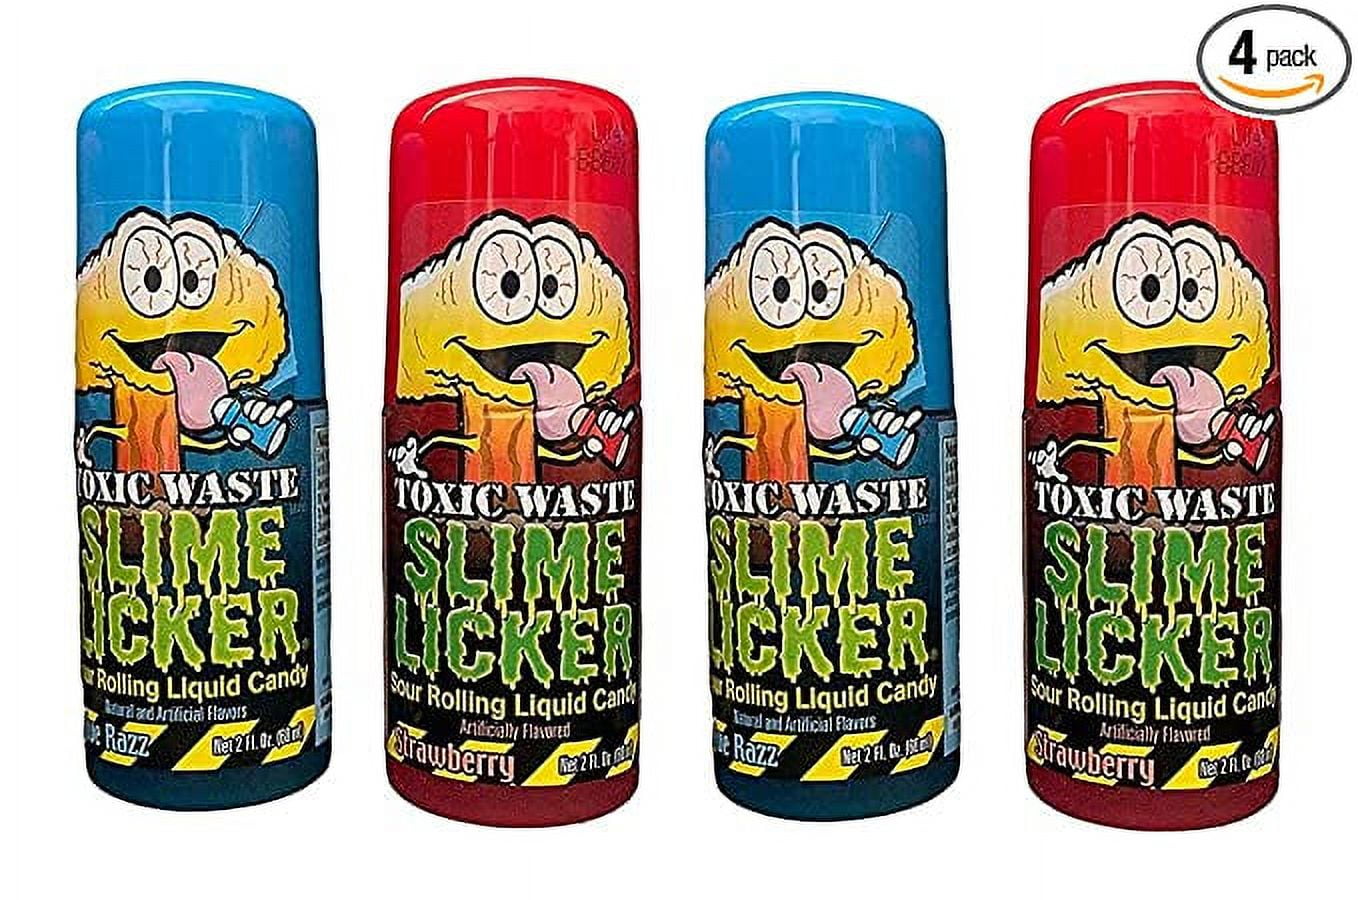 Toxic Waste - Slime Licker Sour Candy 3-Pack of Strawberry - 2oz